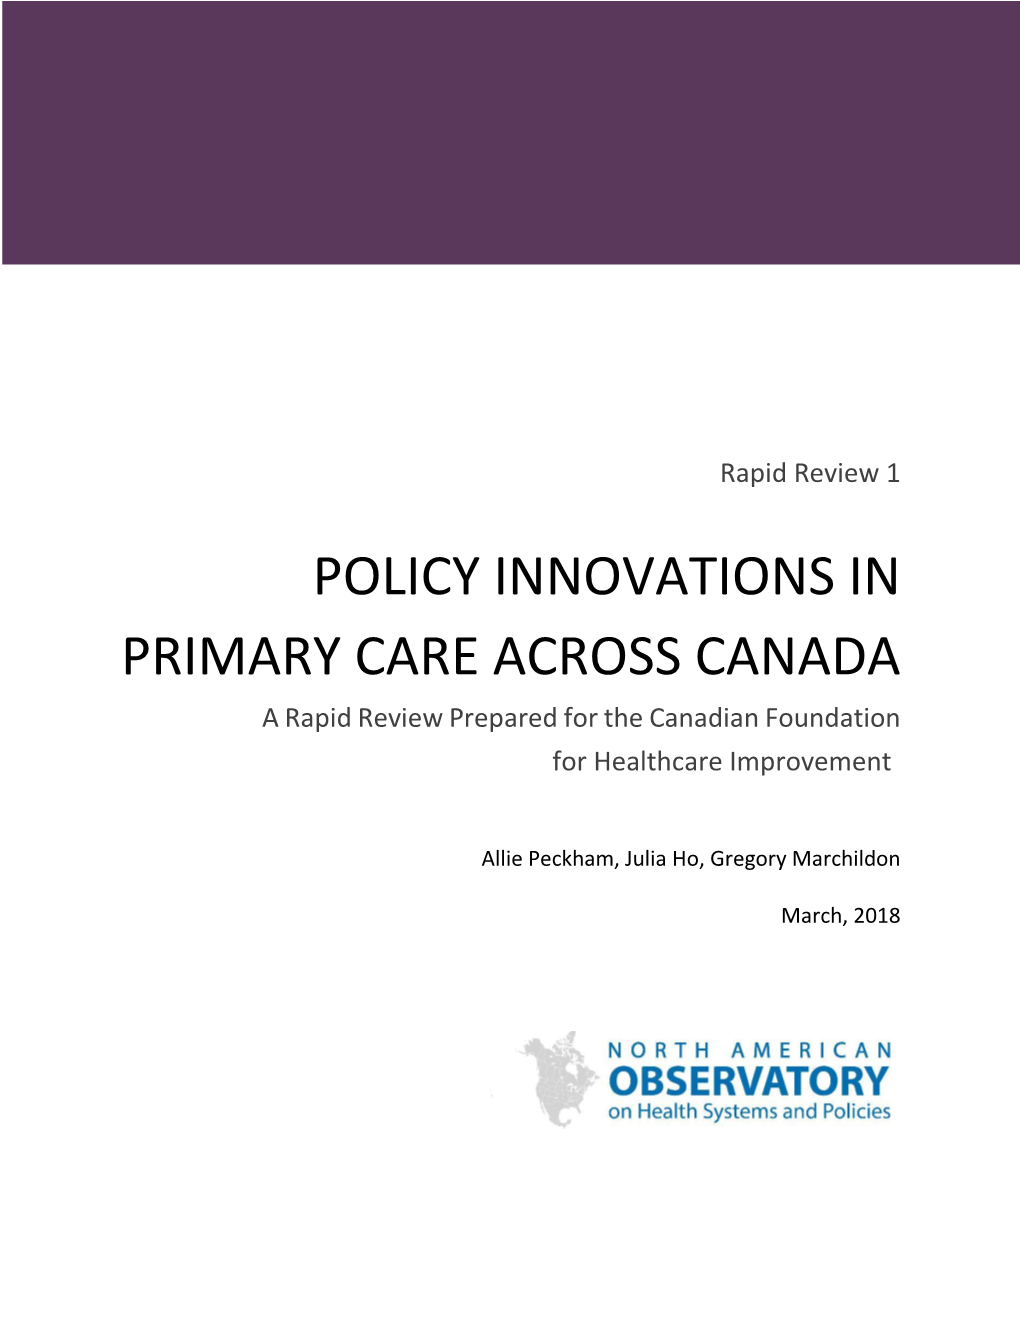 POLICY INNOVATIONS in PRIMARY CARE ACROSS CANADA a Rapid Review Prepared for the Canadian Foundation